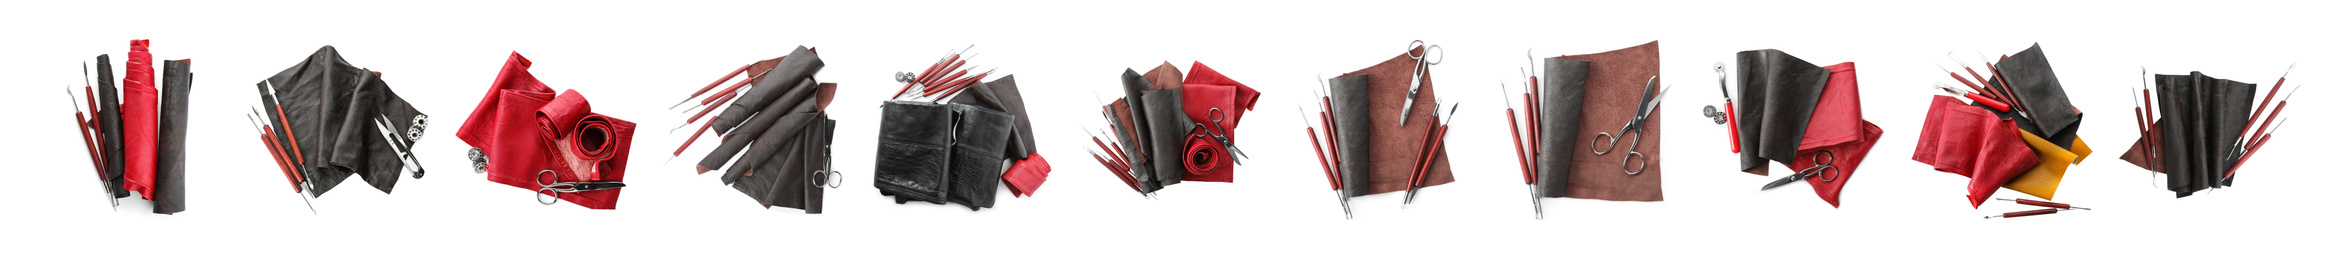 Set with leather samples and craftsman tools on white background, top view. Banner design